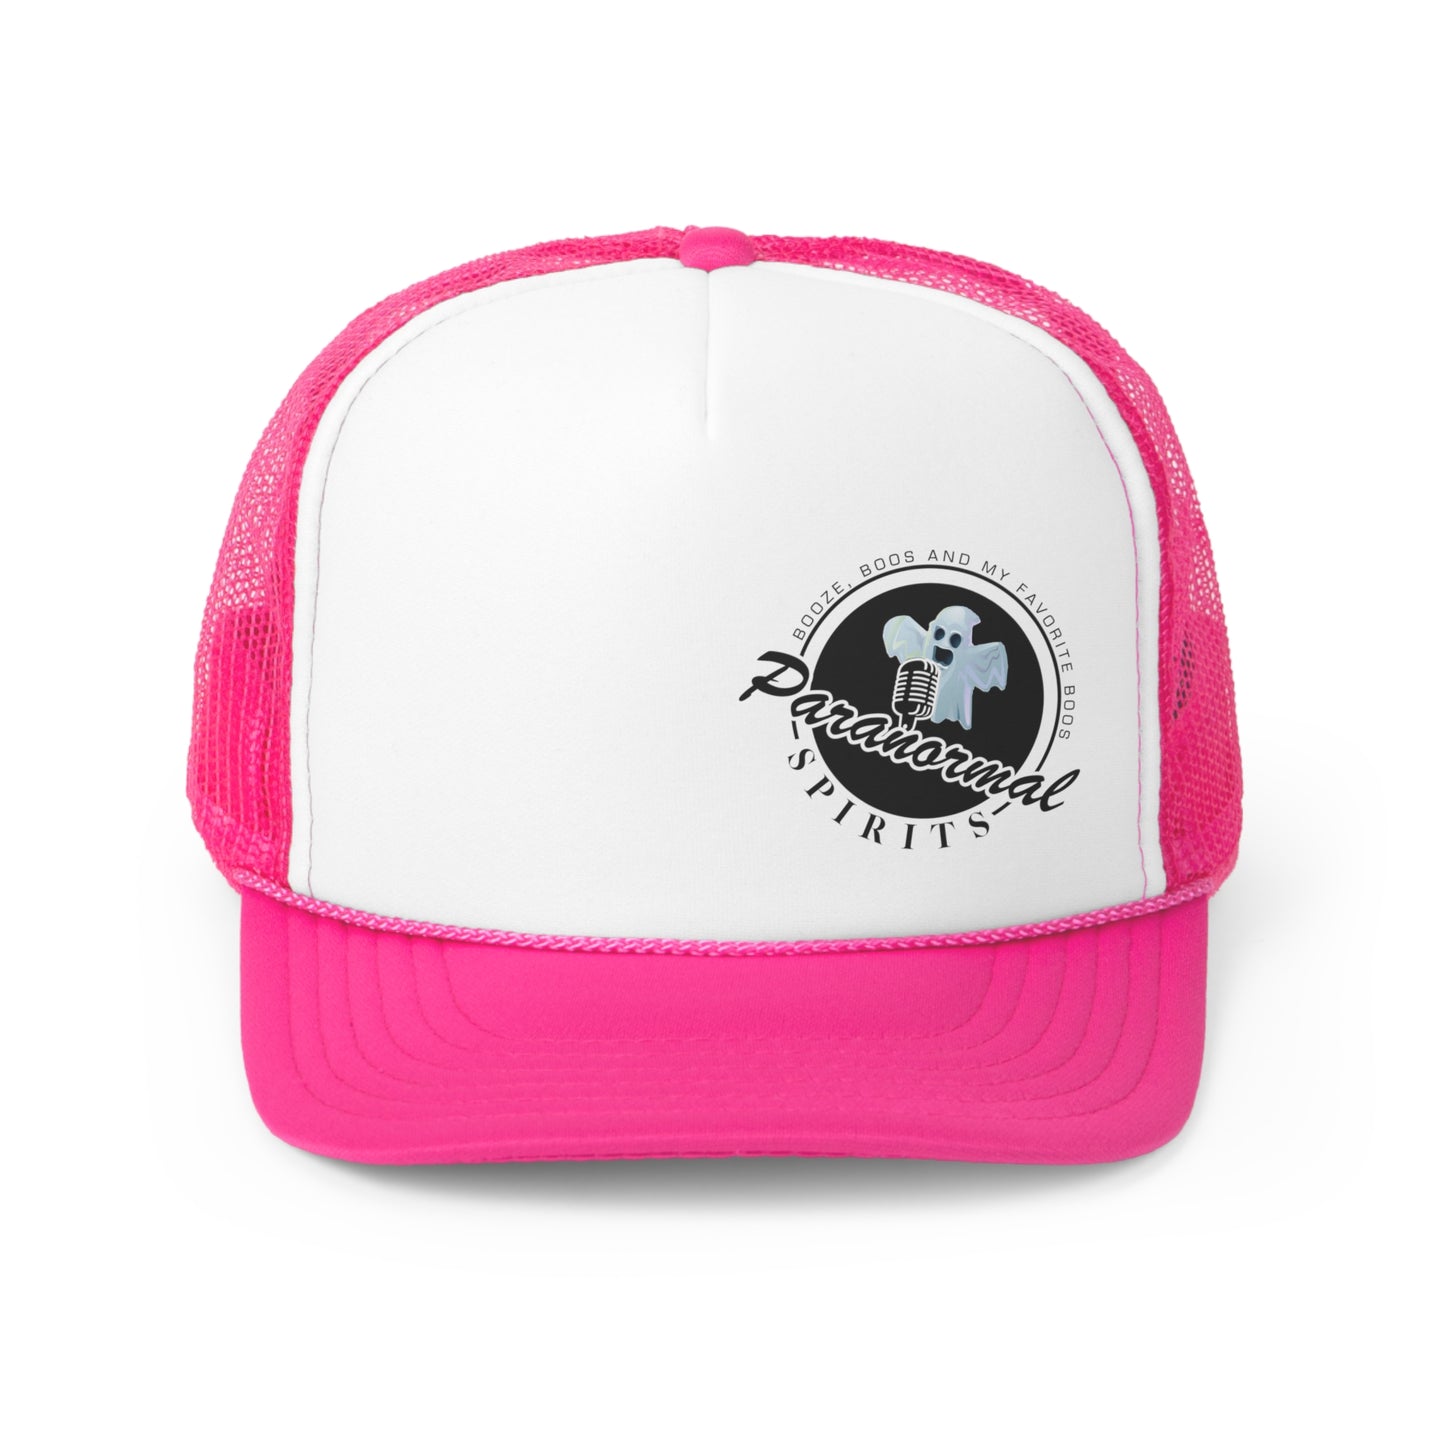 Boozie's Trucker Caps.  Pink, Green, Black or Patriotic Red, White and Blue. 'Merica!